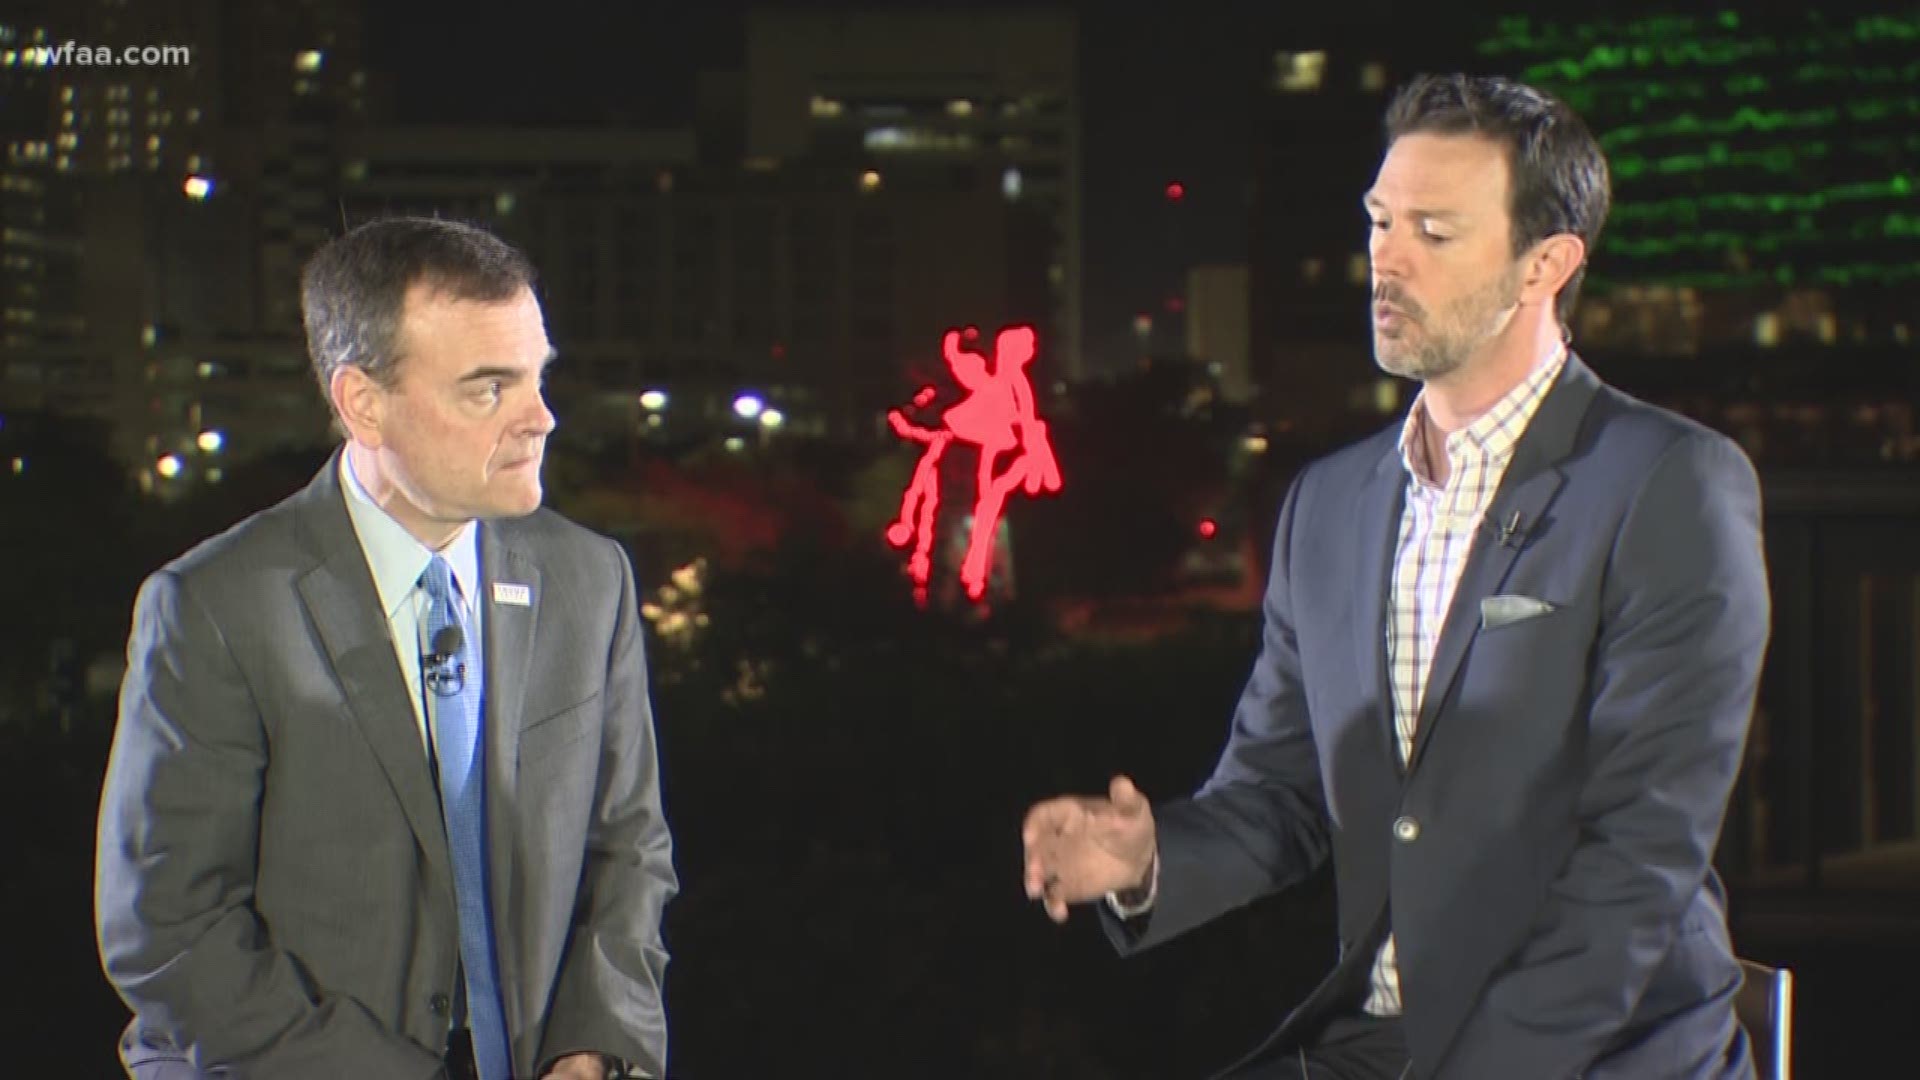 Director of Communications for the Trump Campaign Tim Murtaugh spoke with WFAA anchor Marc Istook Thursday morning ahead of President Donald Trump's rally in Dallas.